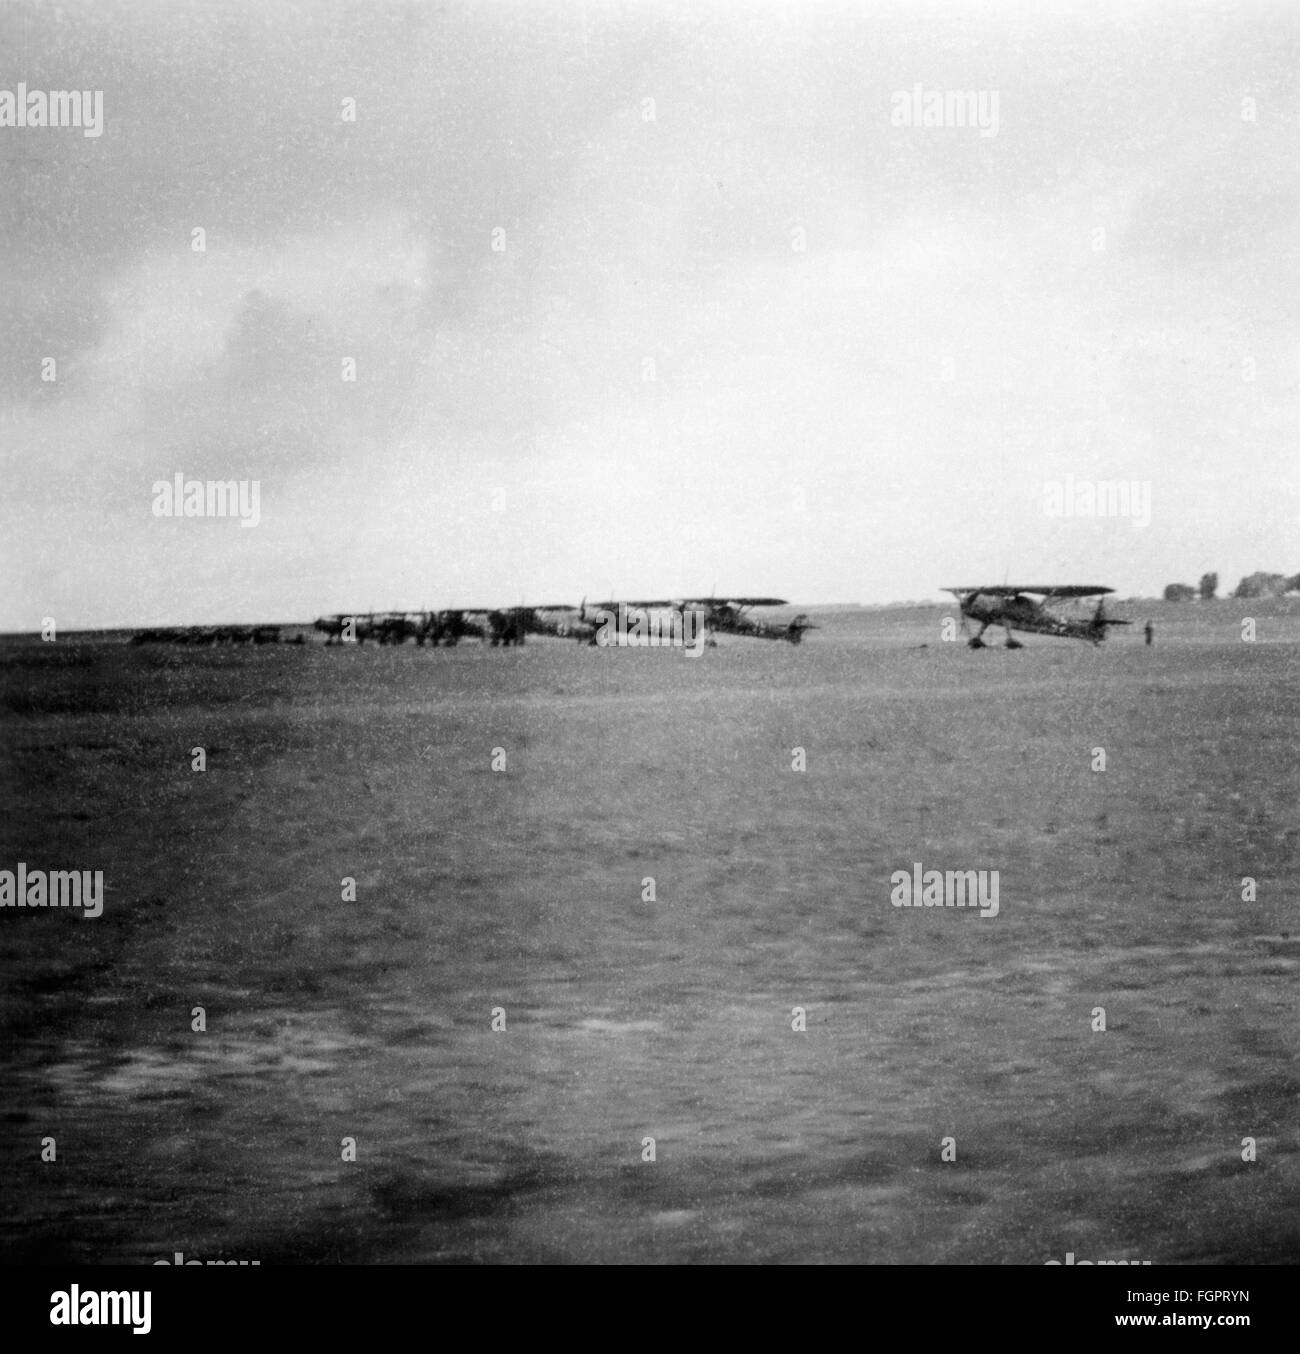 events, Second World War / WWII, Soviet Union, aerial warfare, a squadron of German close reconnaissance aircraft Henschel Hs 126 on the Eastern Front, 1941, Additional-Rights-Clearences-Not Available Stock Photo